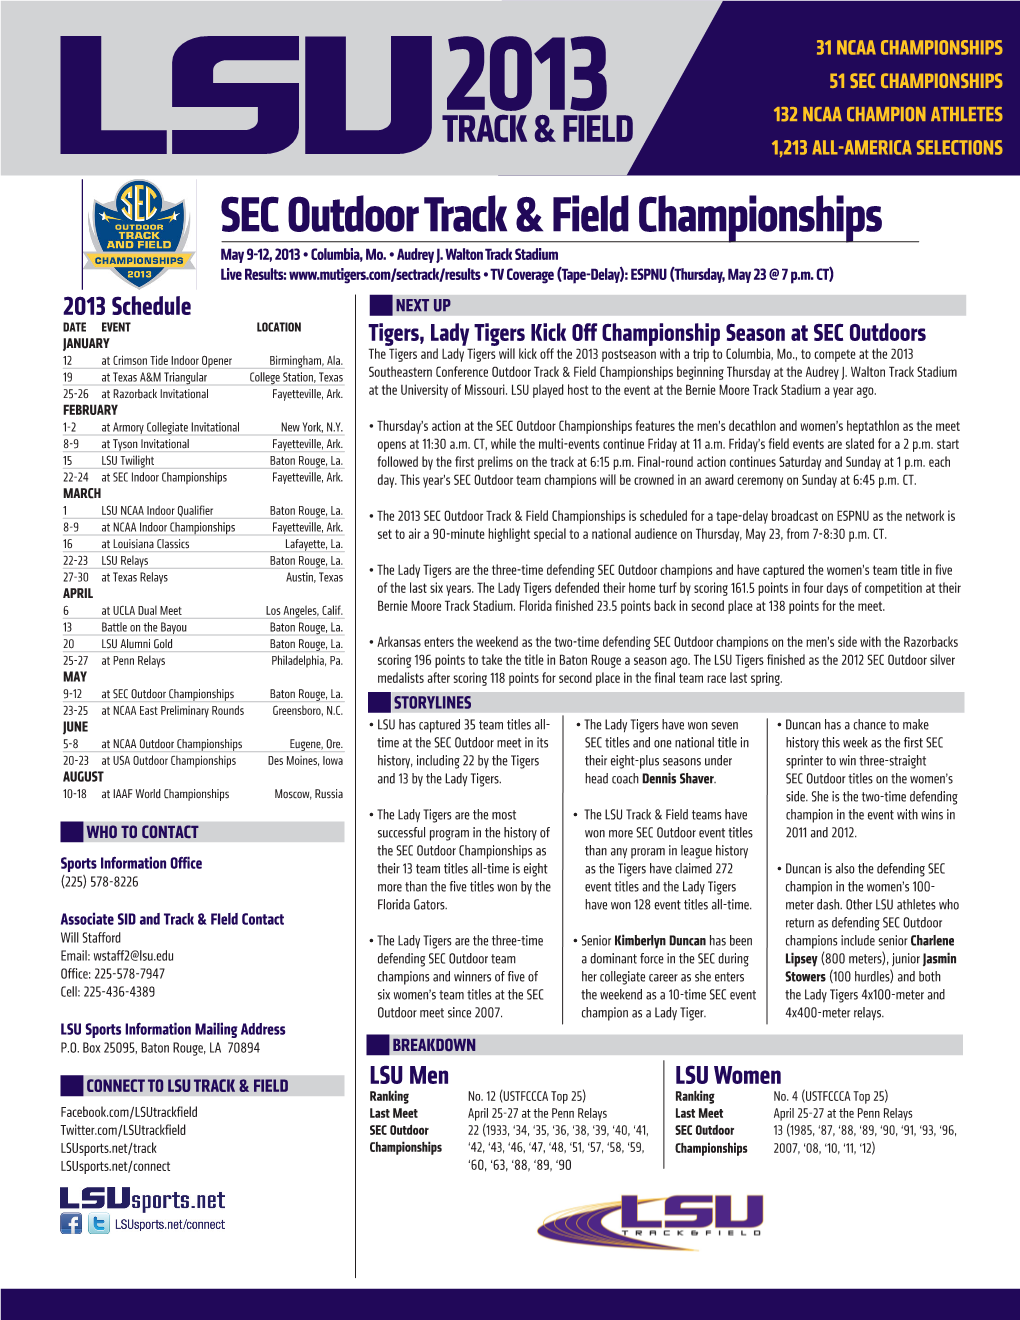 SEC Outdoor Track & Field Championships